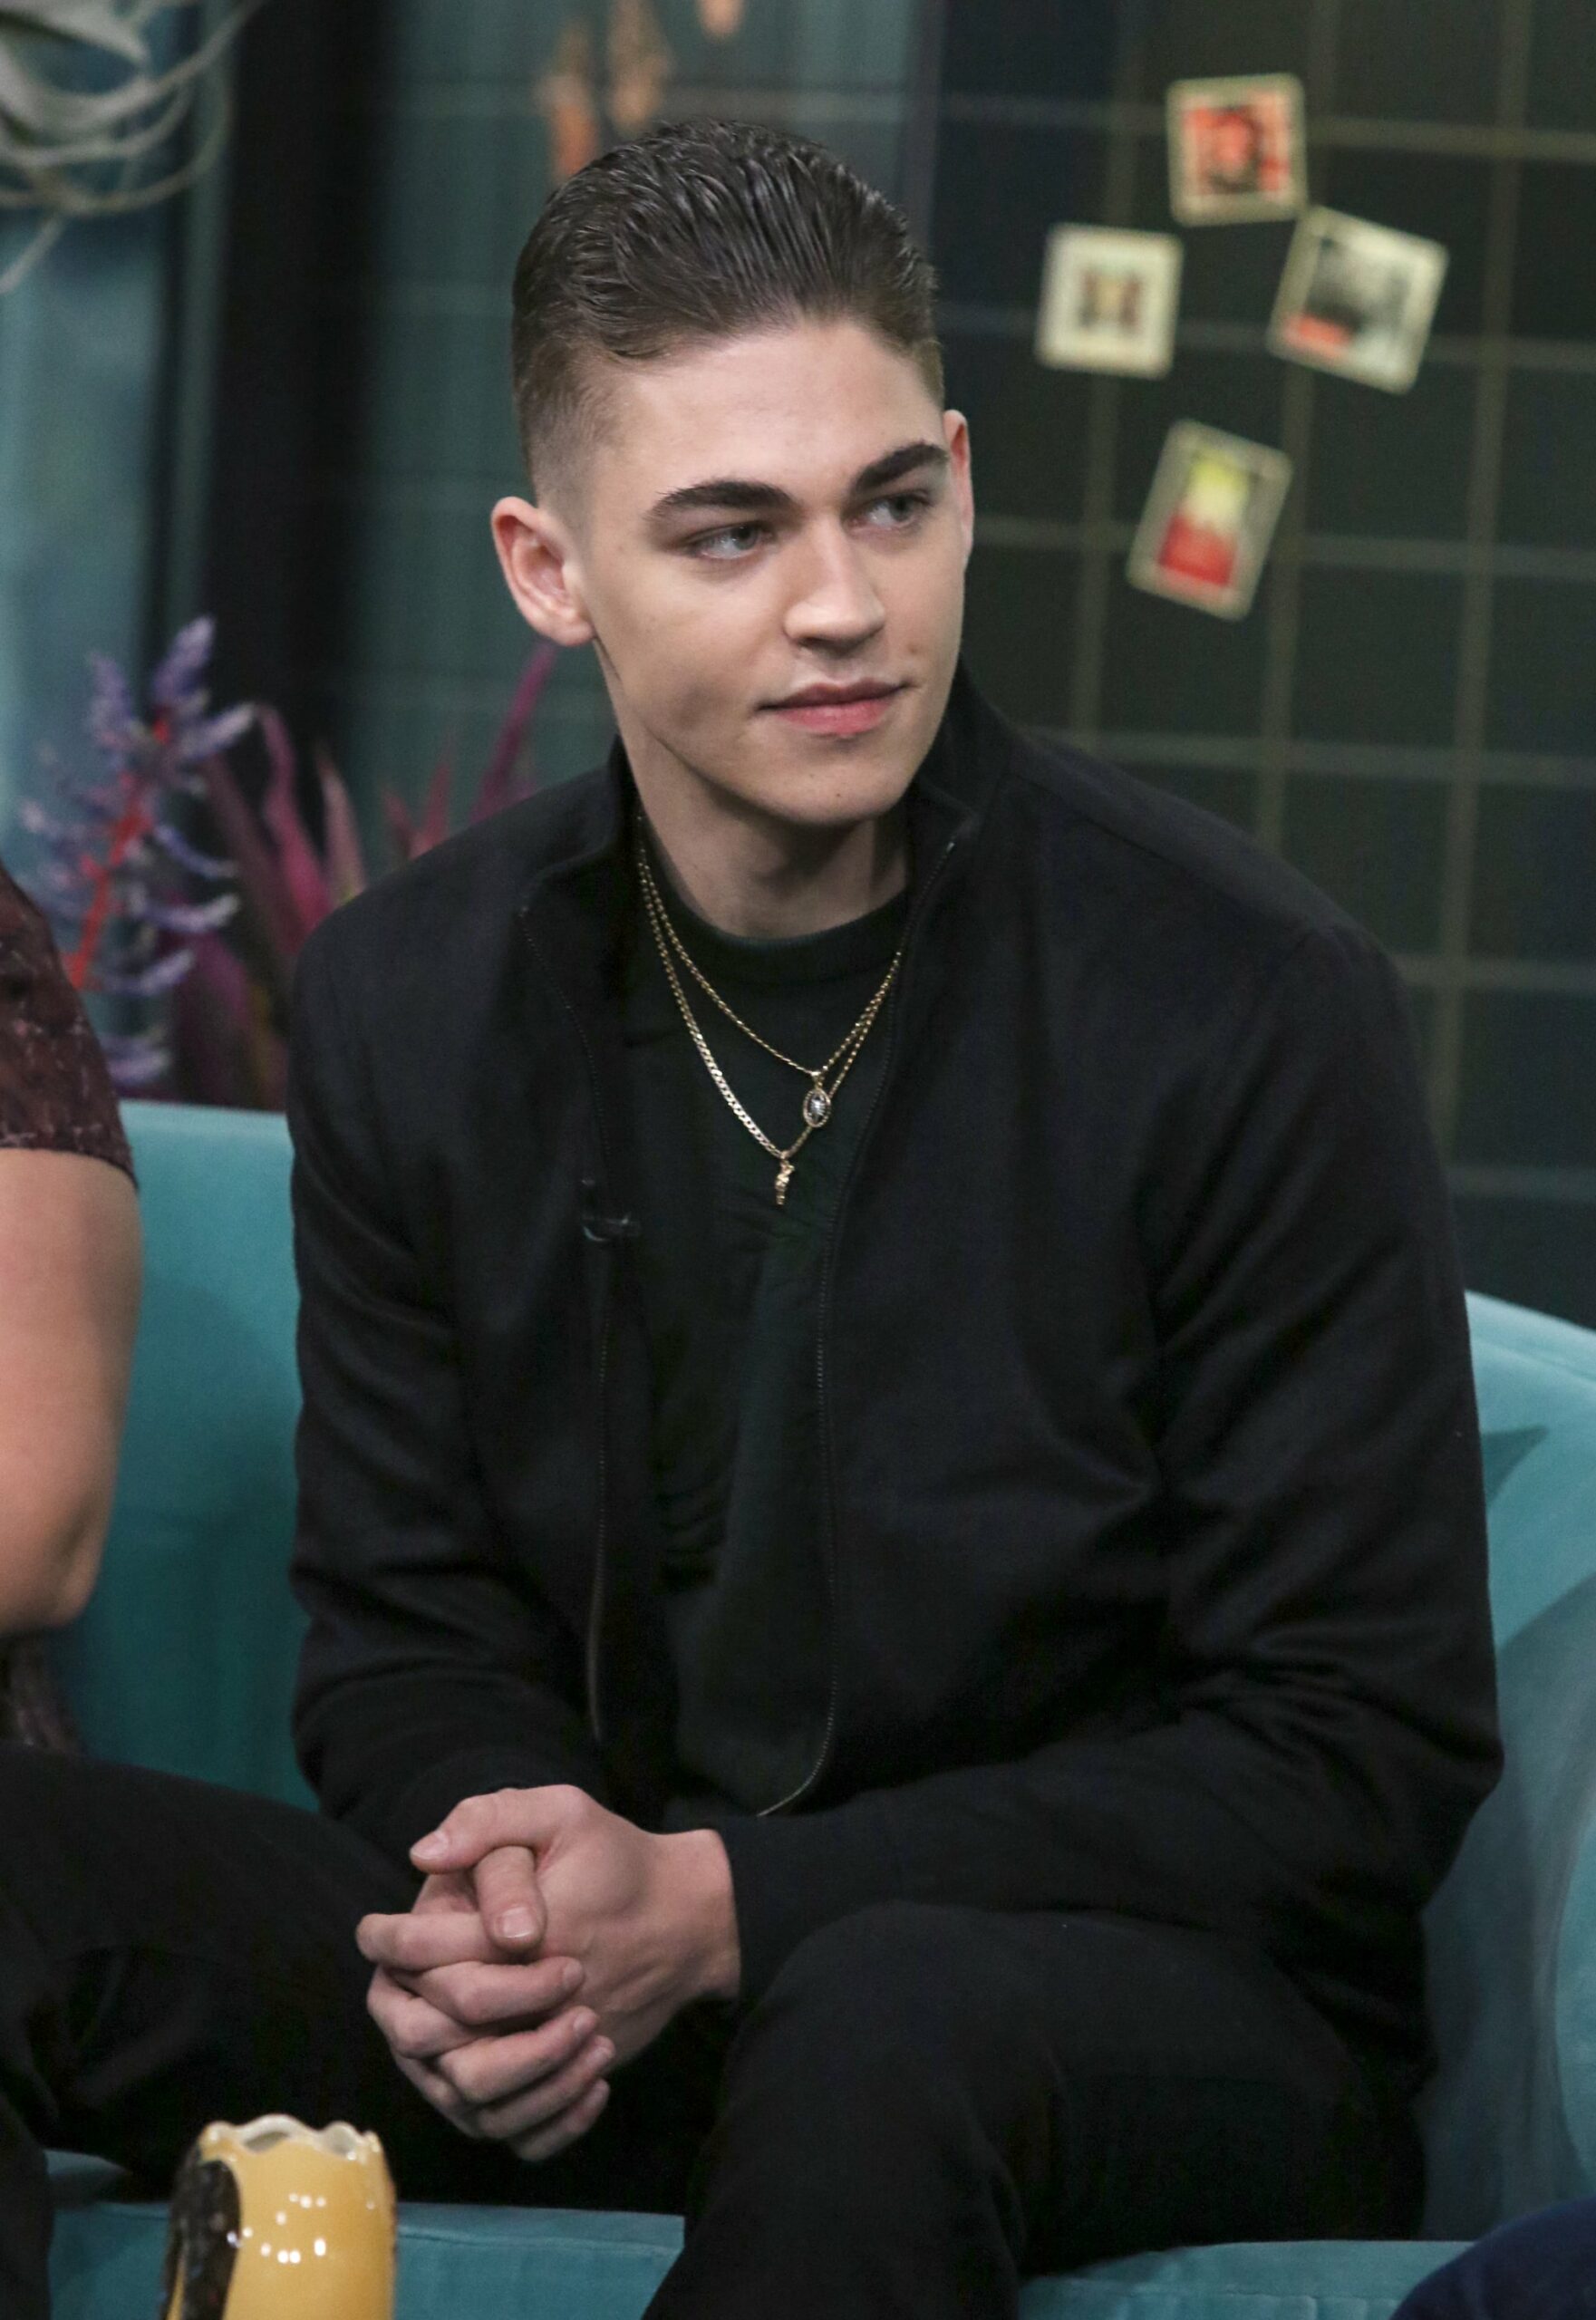 NEW YORK, NEW YORK - APRIL 11: Actor Hero Fiennes-Tiffin attends the Build Brunch at Build Studio on April 11, 2019 in New York City. (Photo by Jim Spellman/Getty Images)